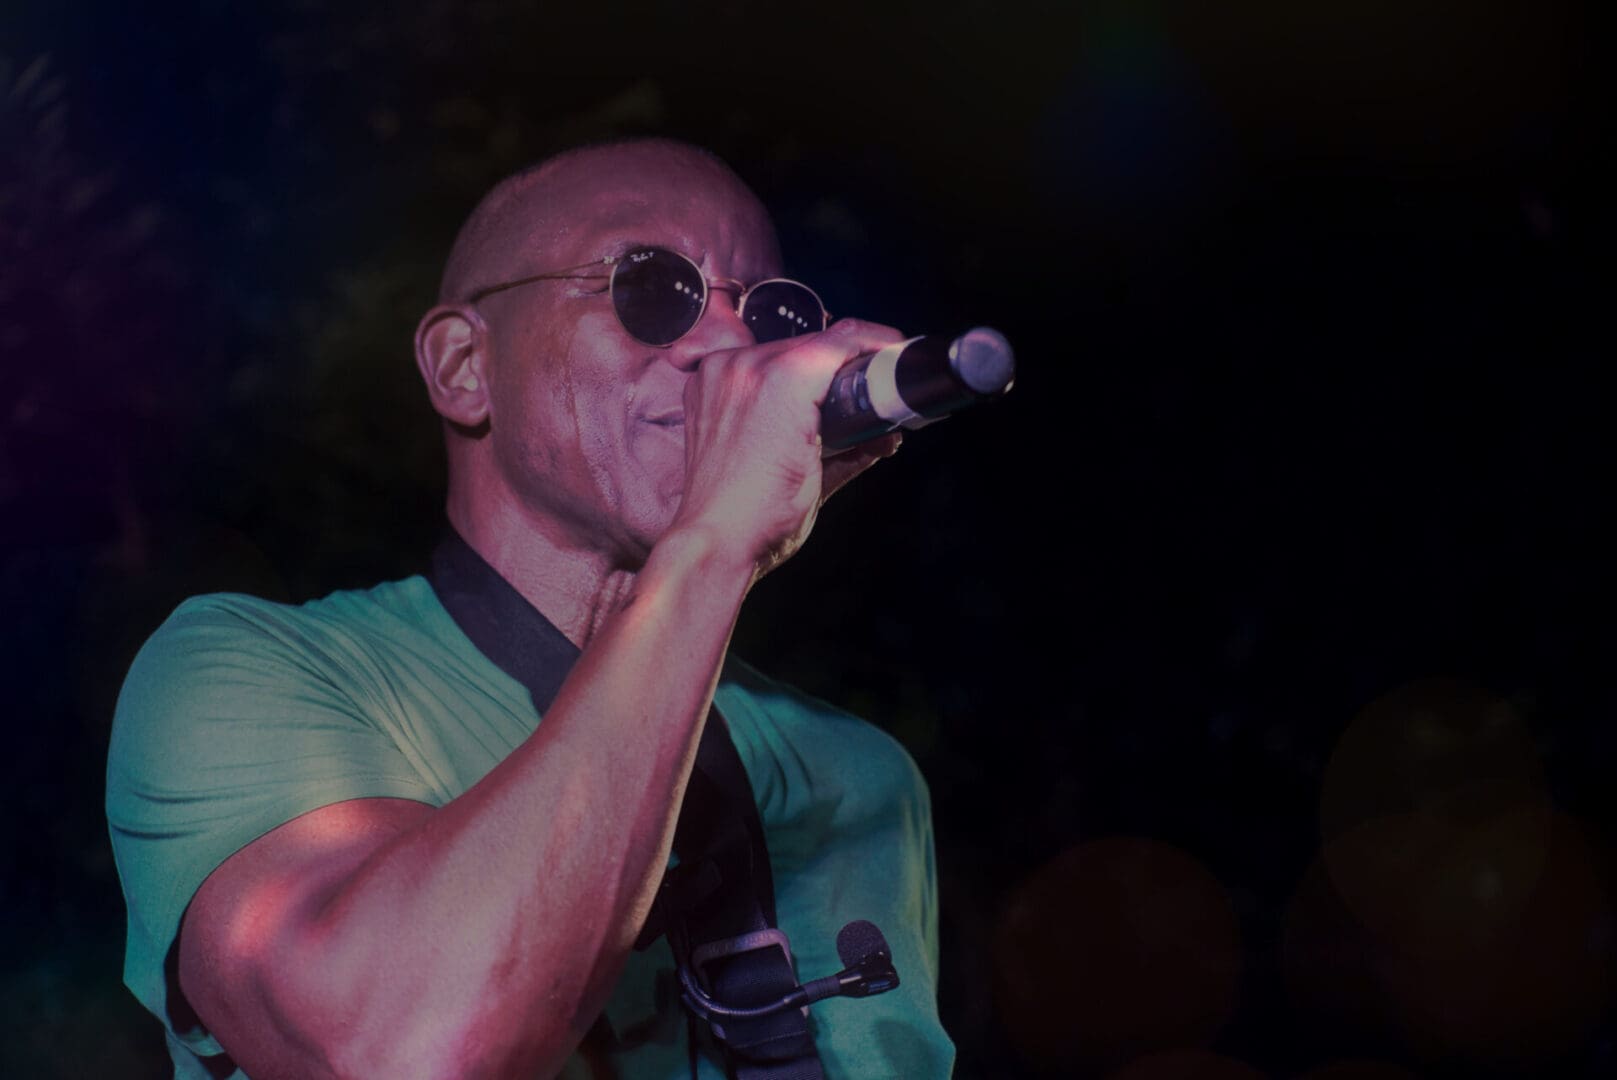 A man in sunglasses singing into a microphone.